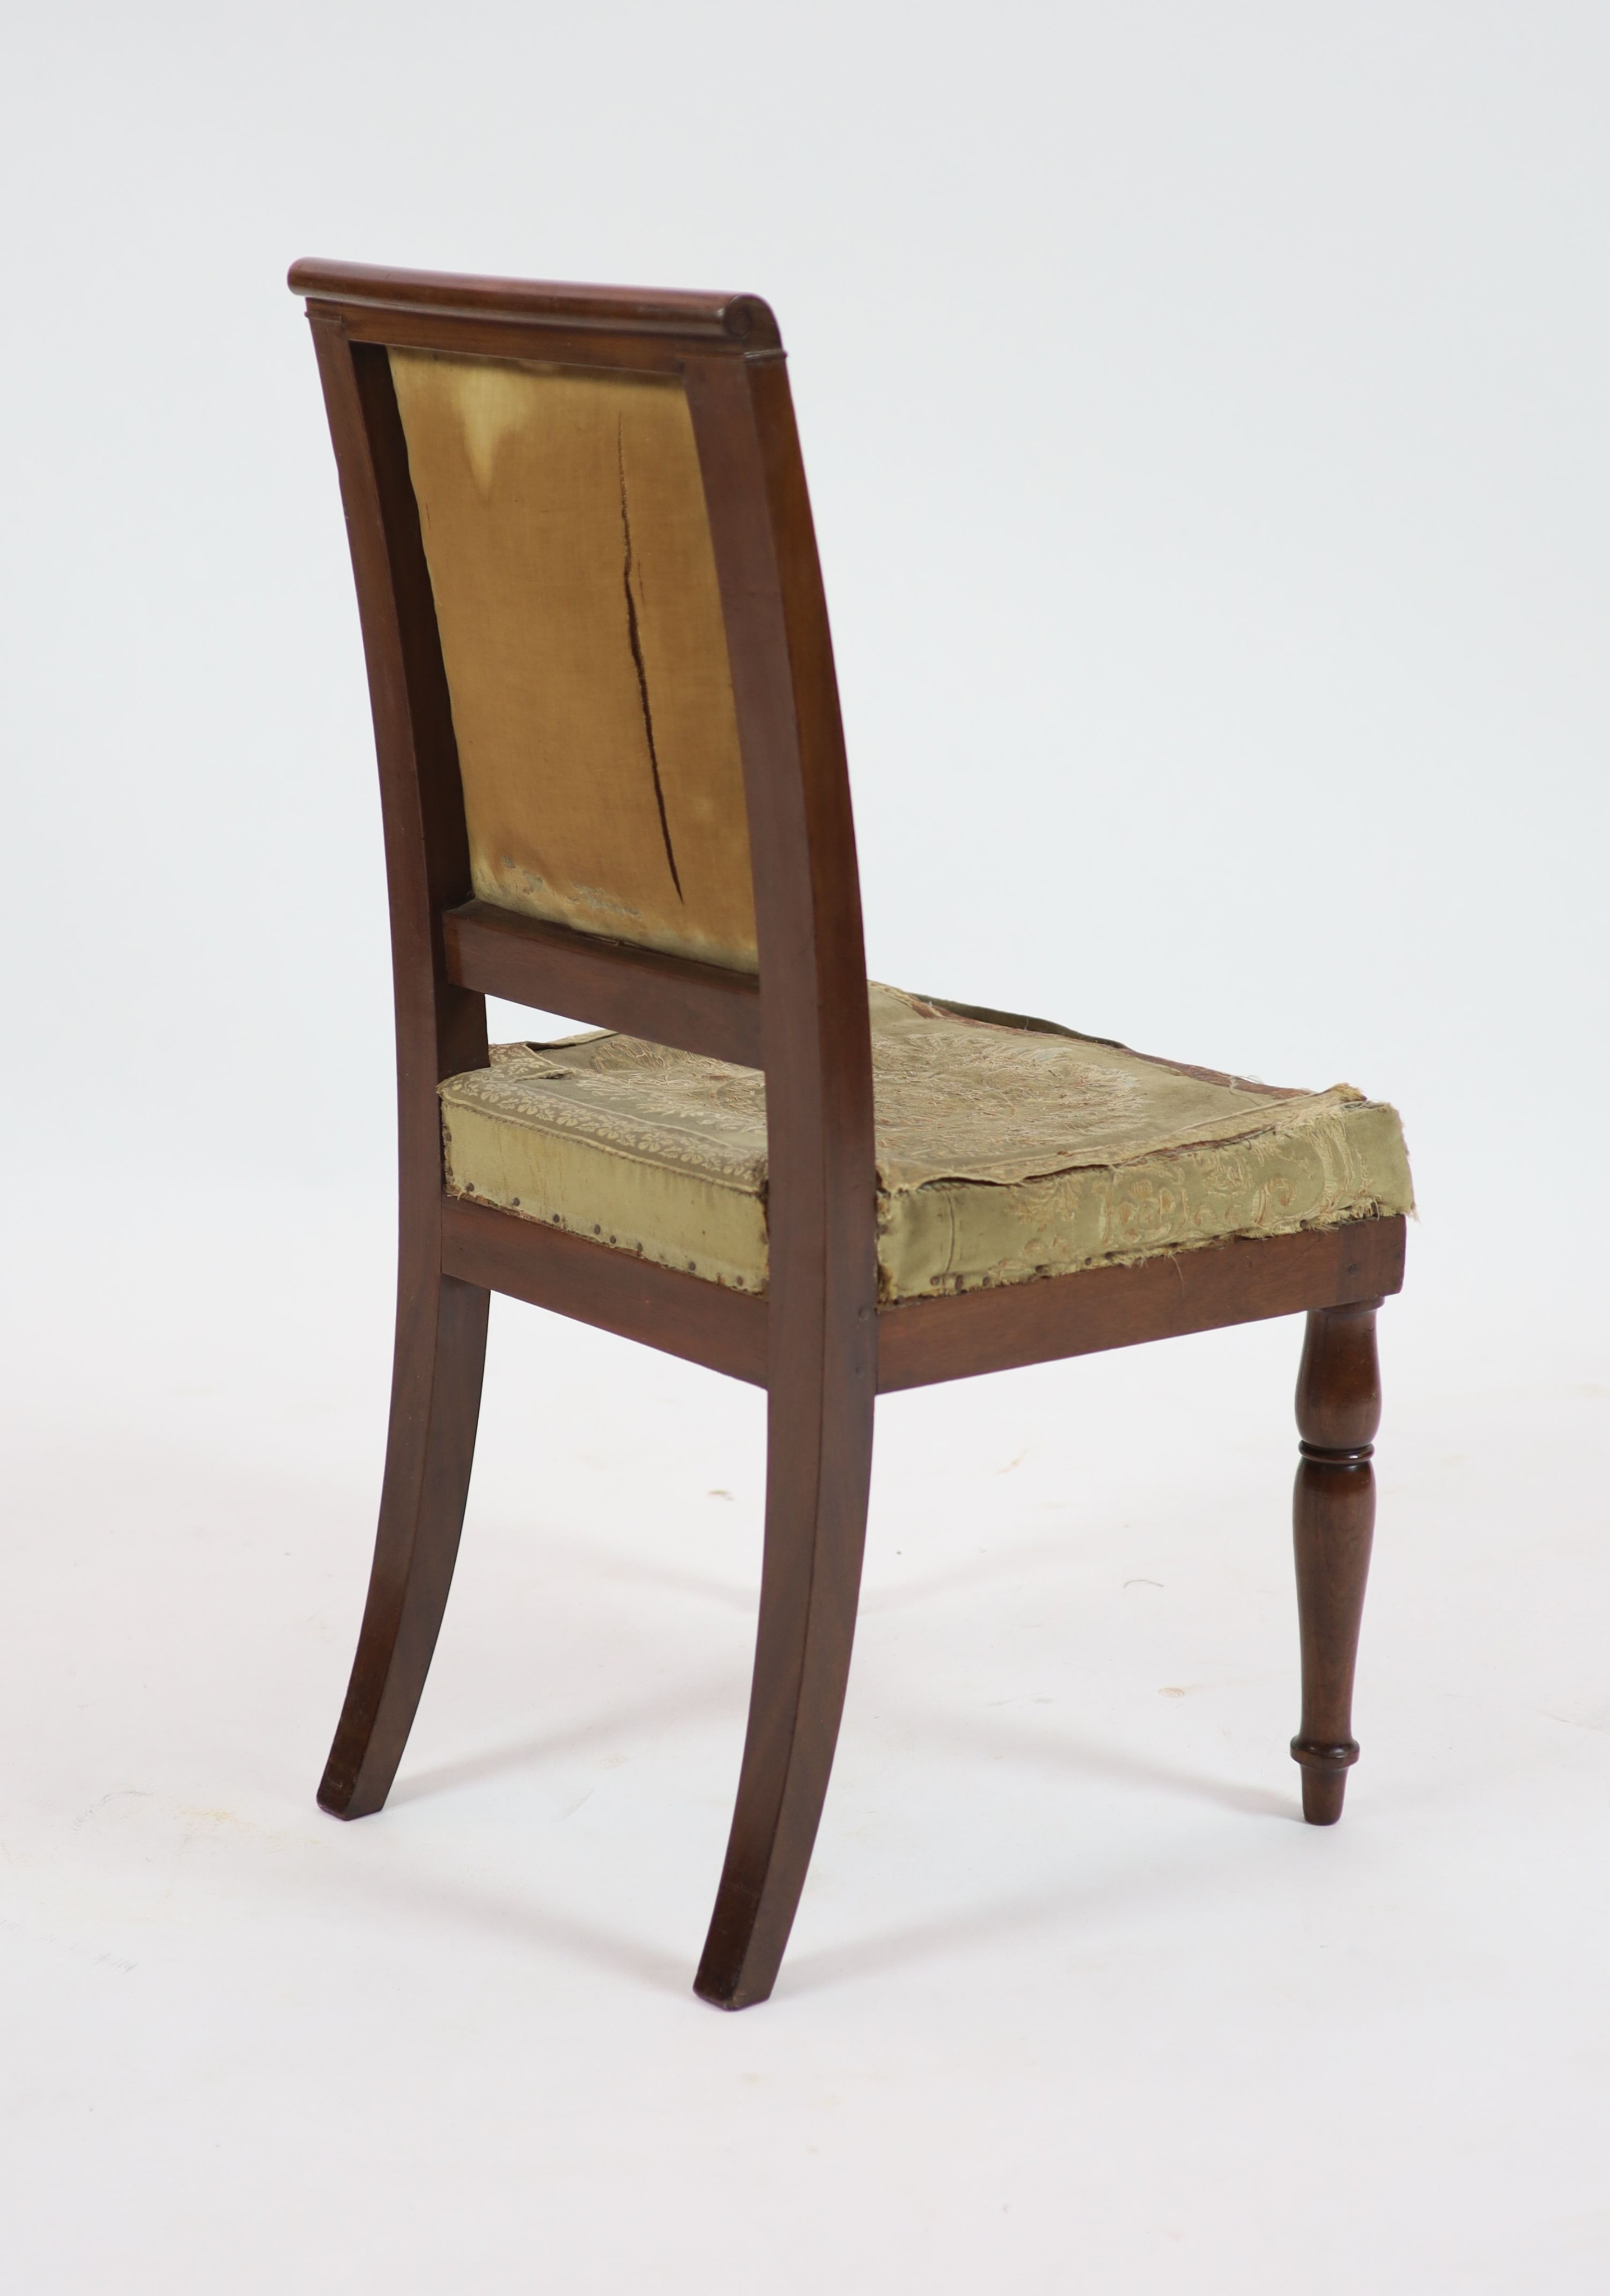 A French Empire mahogany side chair by Georges Jacob for Fontainebleu, H 90cm. W 49cm. D 42cm.